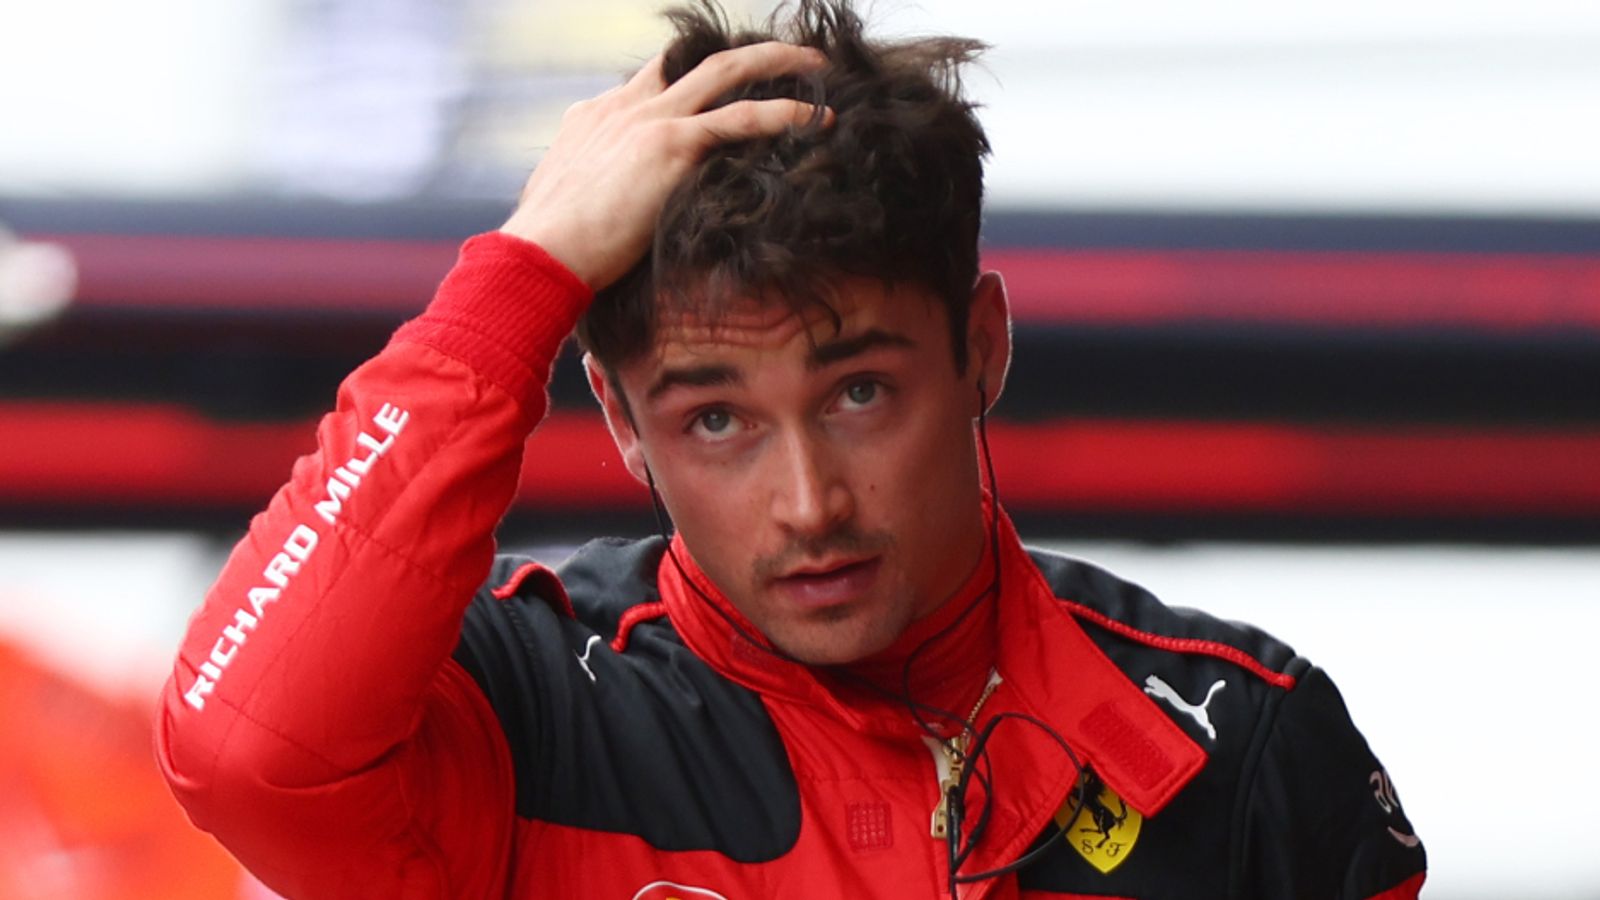 Mystified Leclerc adamant 'something off' with Ferrari after Q1 exit